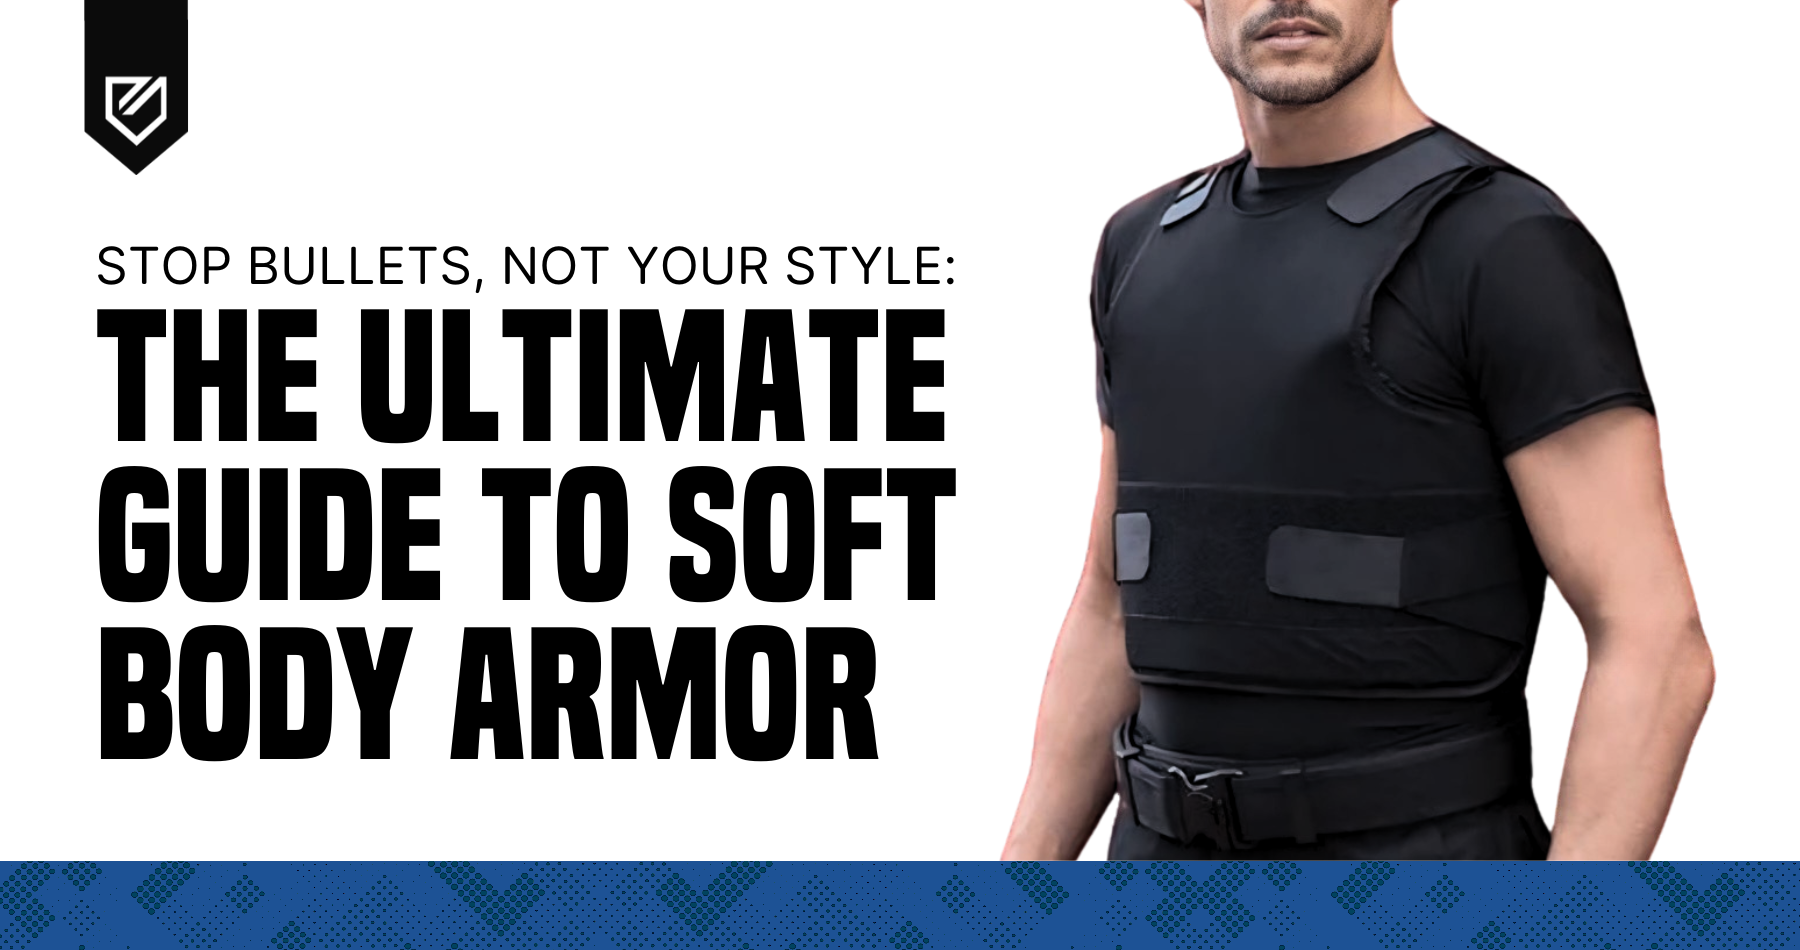 Stop Bullets, Not Your Style: The Ultimate Guide to Soft Body Armor